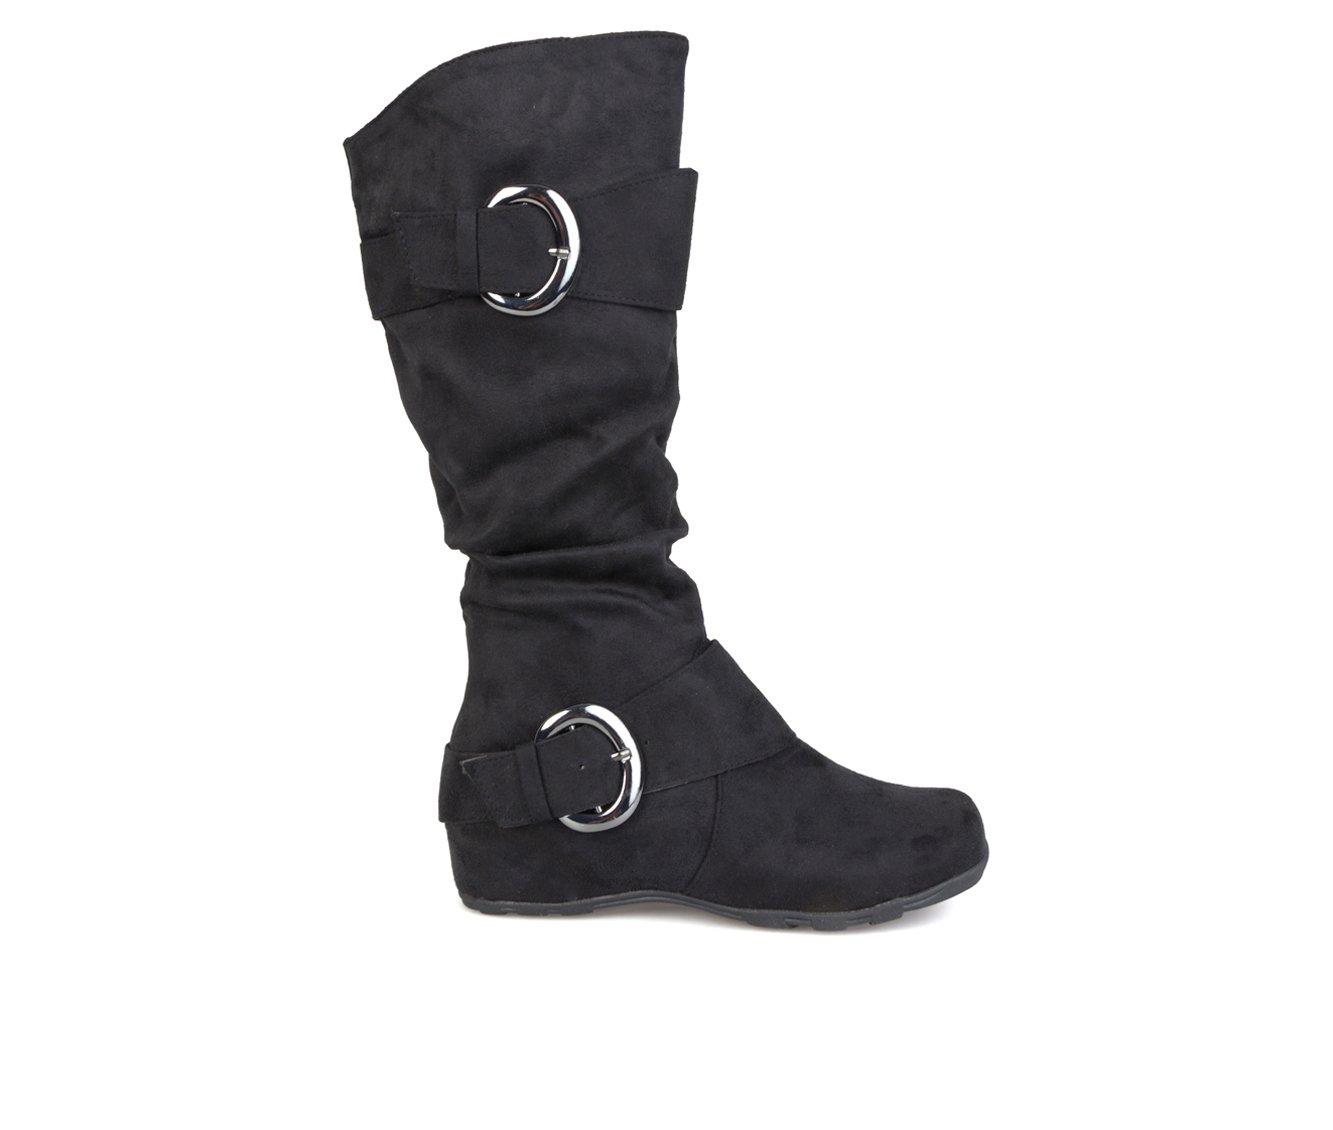 Women's Journee Collection Jester Extra Wide Calf Knee High Boots